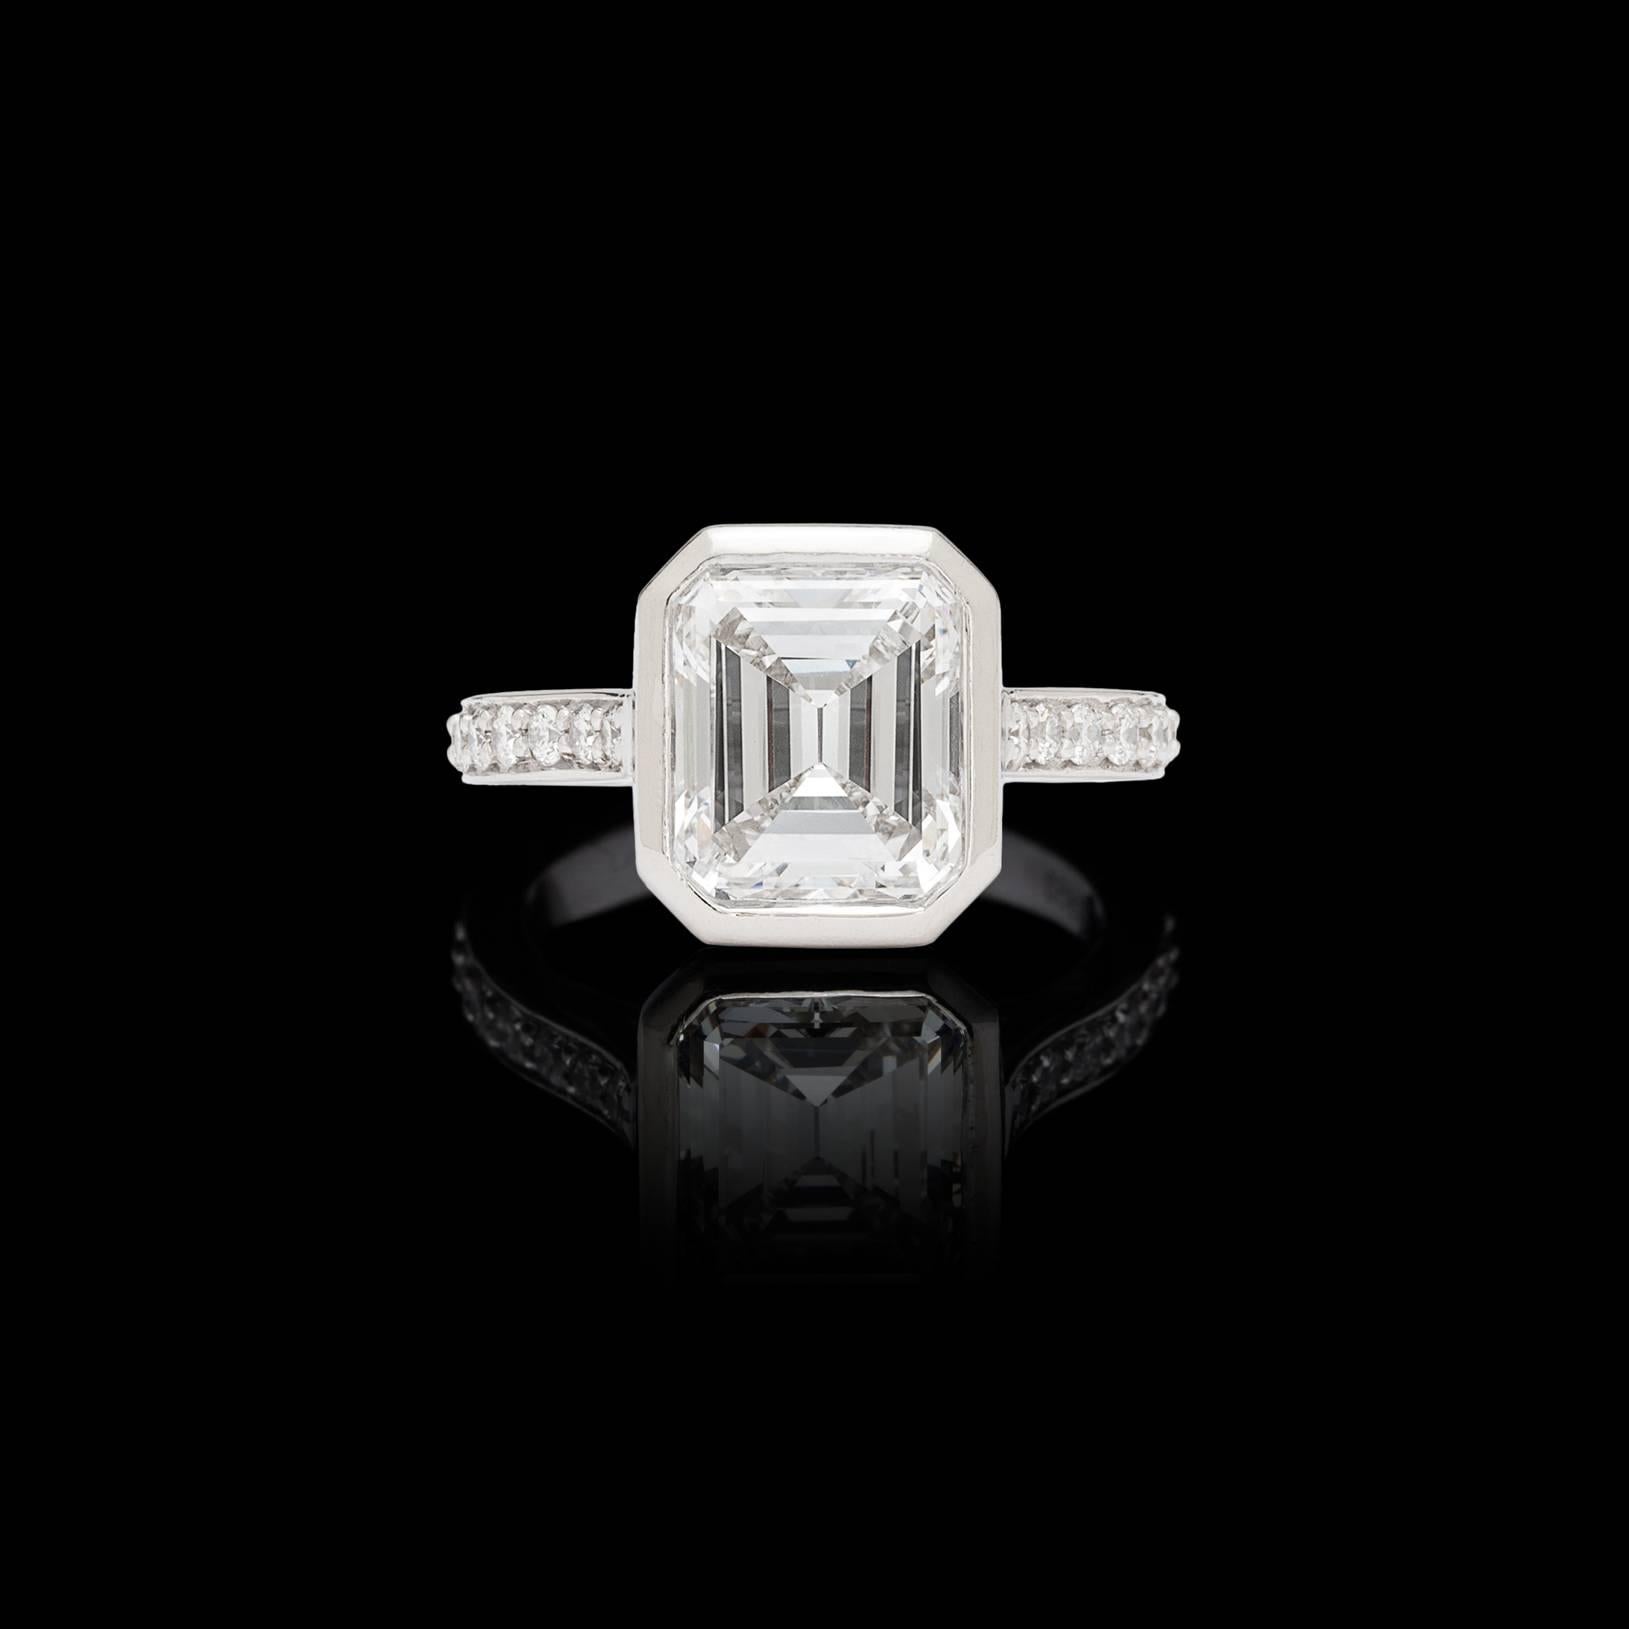 Wow! When an extraordinary diamond meets exceptional design, the result is truly mind blowing. This Platinum stunner features a phenomenal GIA graded F/VS2 Emerald Cut Diamond expertly bezel set for maximum light return. The ring is accented by 20